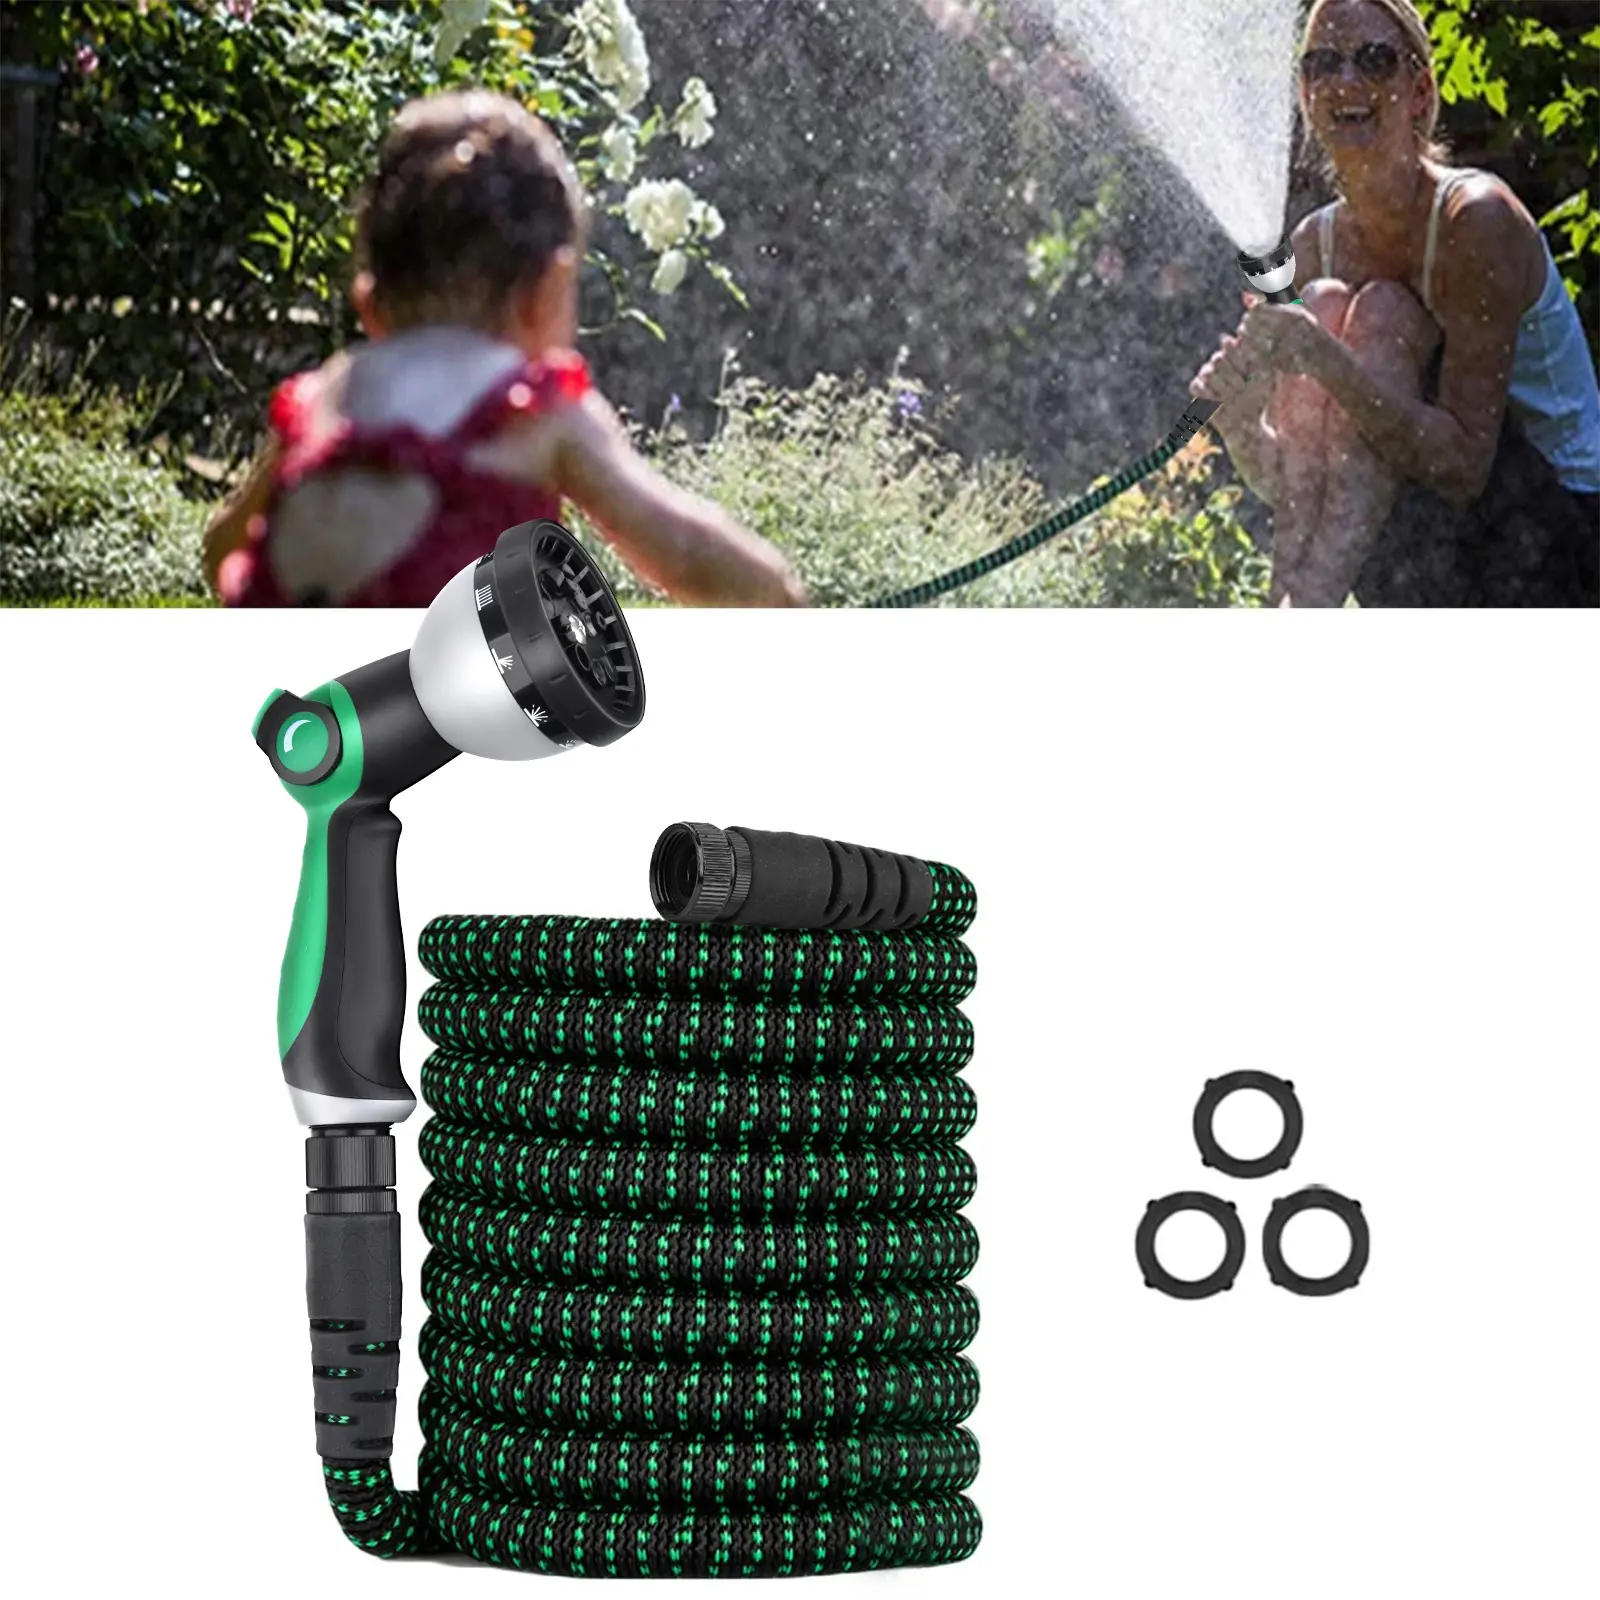 EVEAGE 100ft Flexible Garden Hose with Triple Layer Latex Core